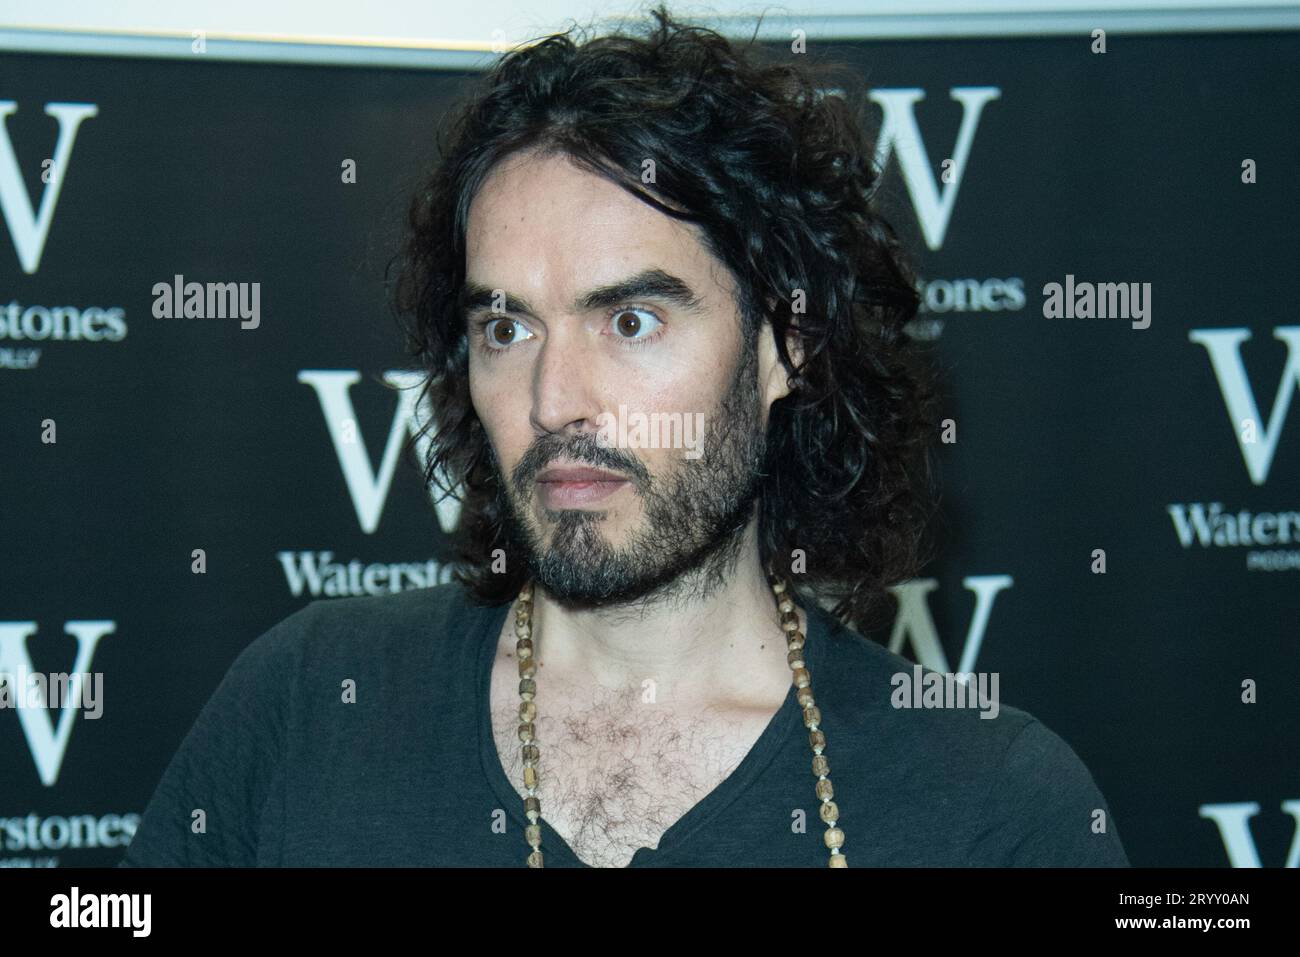 London, UK. 05 Dec, 2014. Comedian Russell Brand signs copies of his books 'Revolution' and 'The Pied Piper Of Hamelin' at Waterstones Piccadilly. Cre Stock Photo